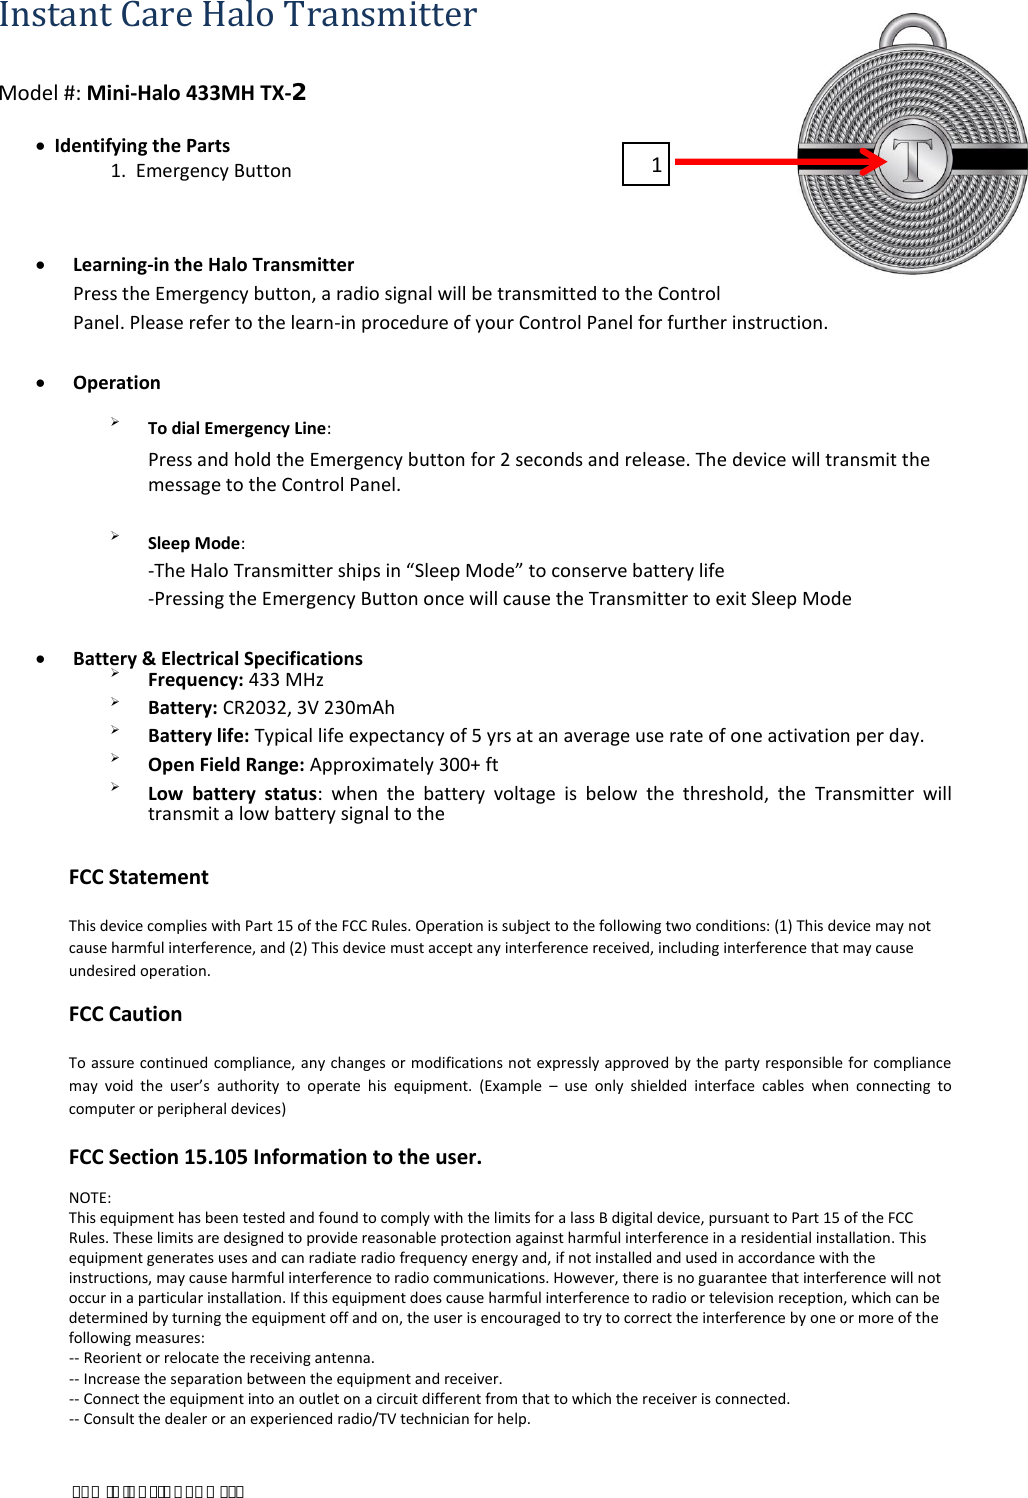 Page 2 of Instant Care HALOM433 Halo Transmitter User Manual 